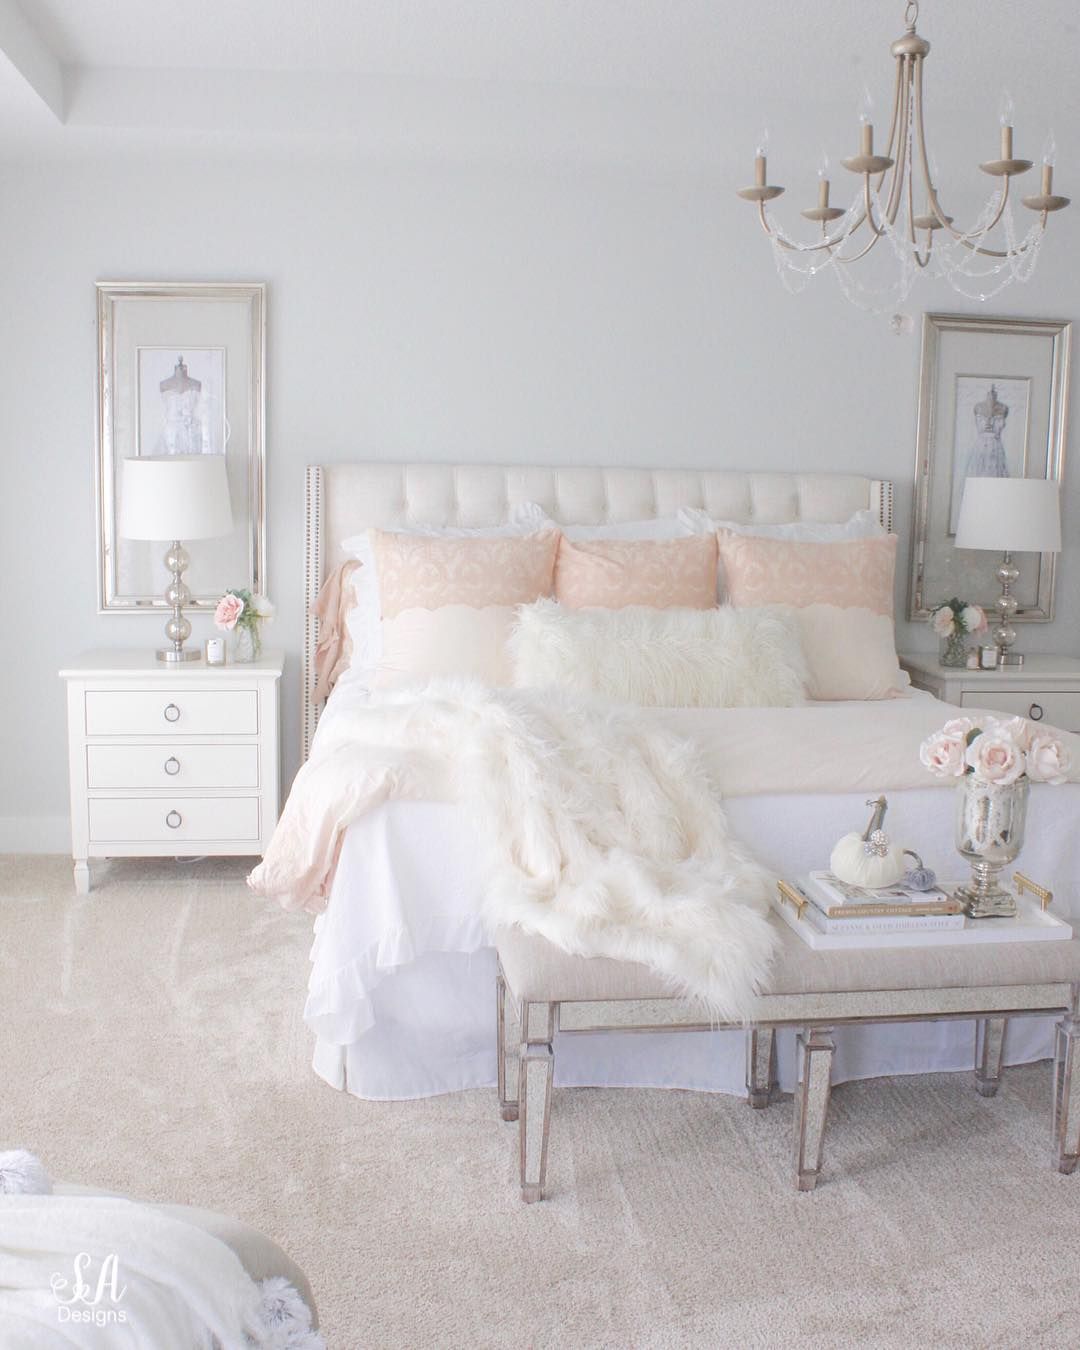 Glam Bedroom with White faux fur decor accents via @summeradamsdesigns